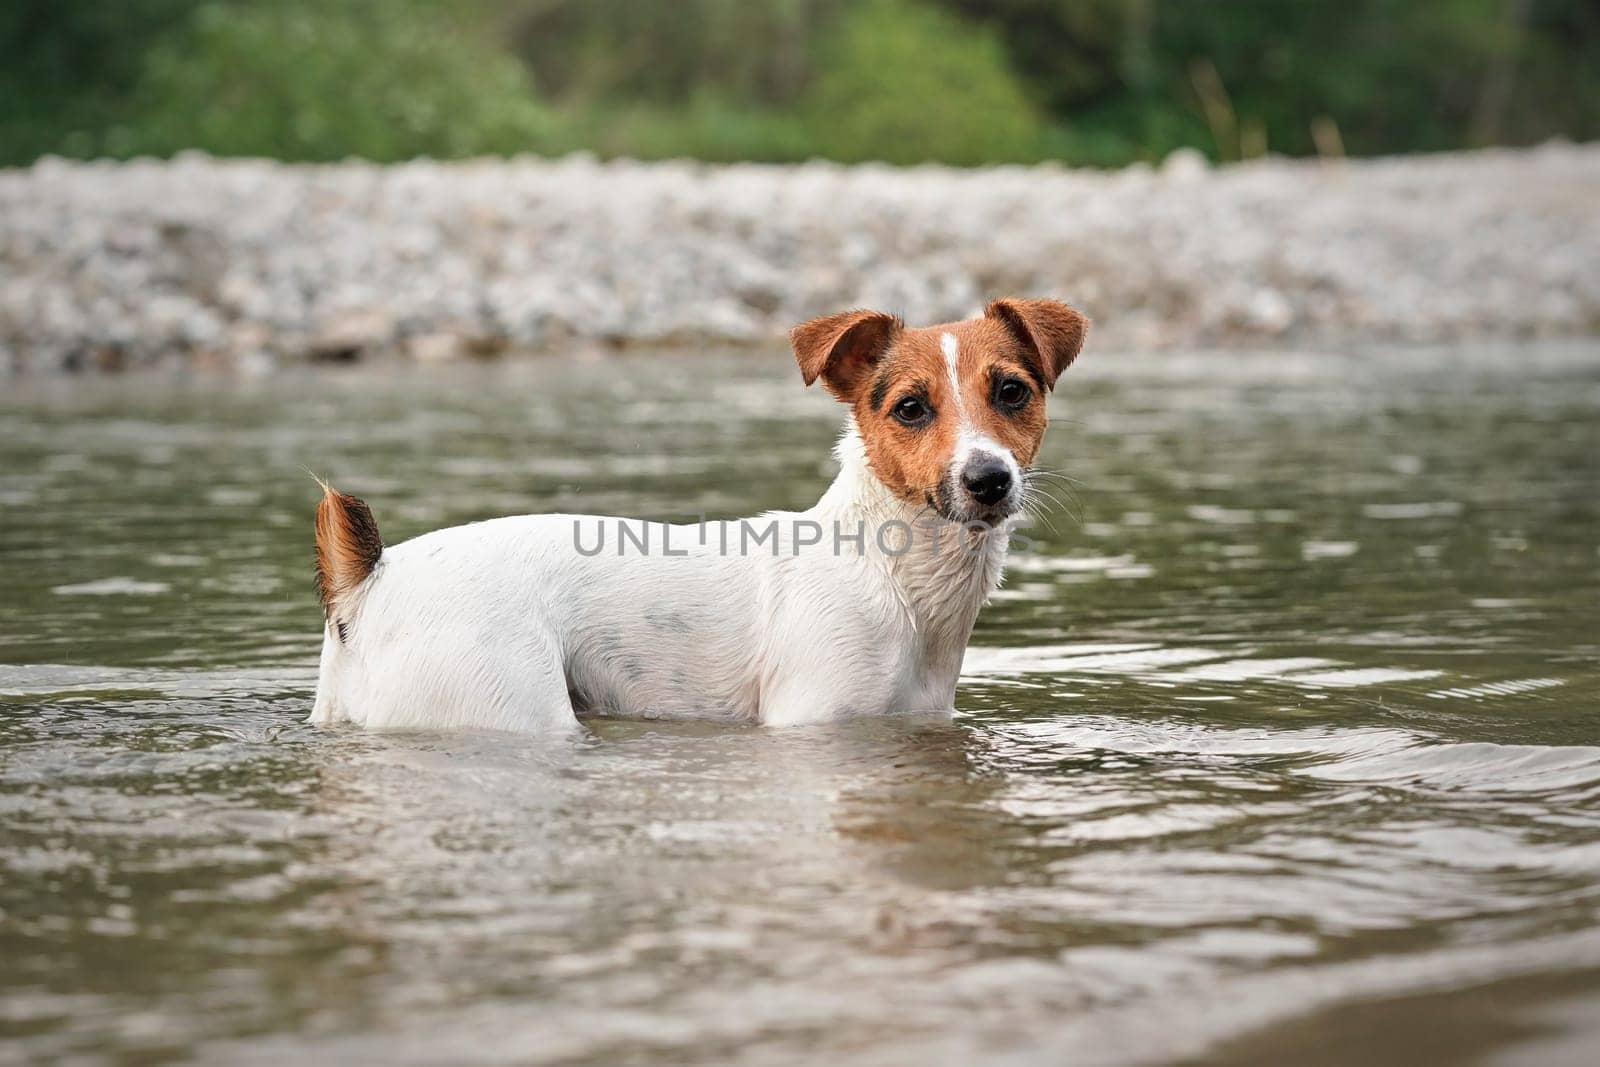 Small Jack Russell terrier crawling in shallow water on a summer day, her fur wet from swimming by Ivanko